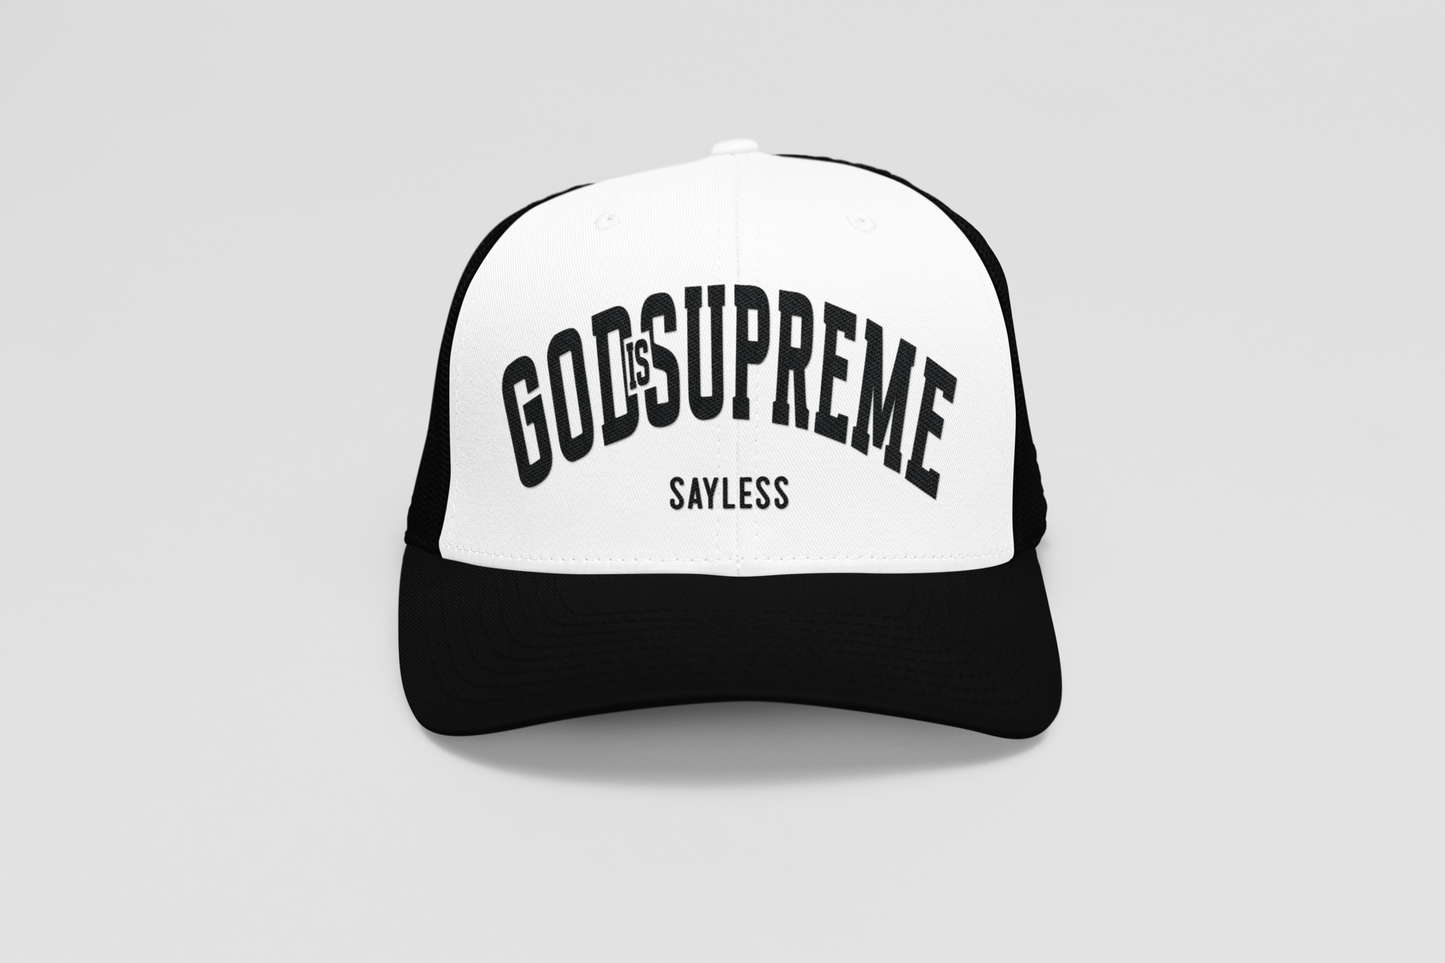 God is Supreme Sayless White and Black (Trucker Hat)